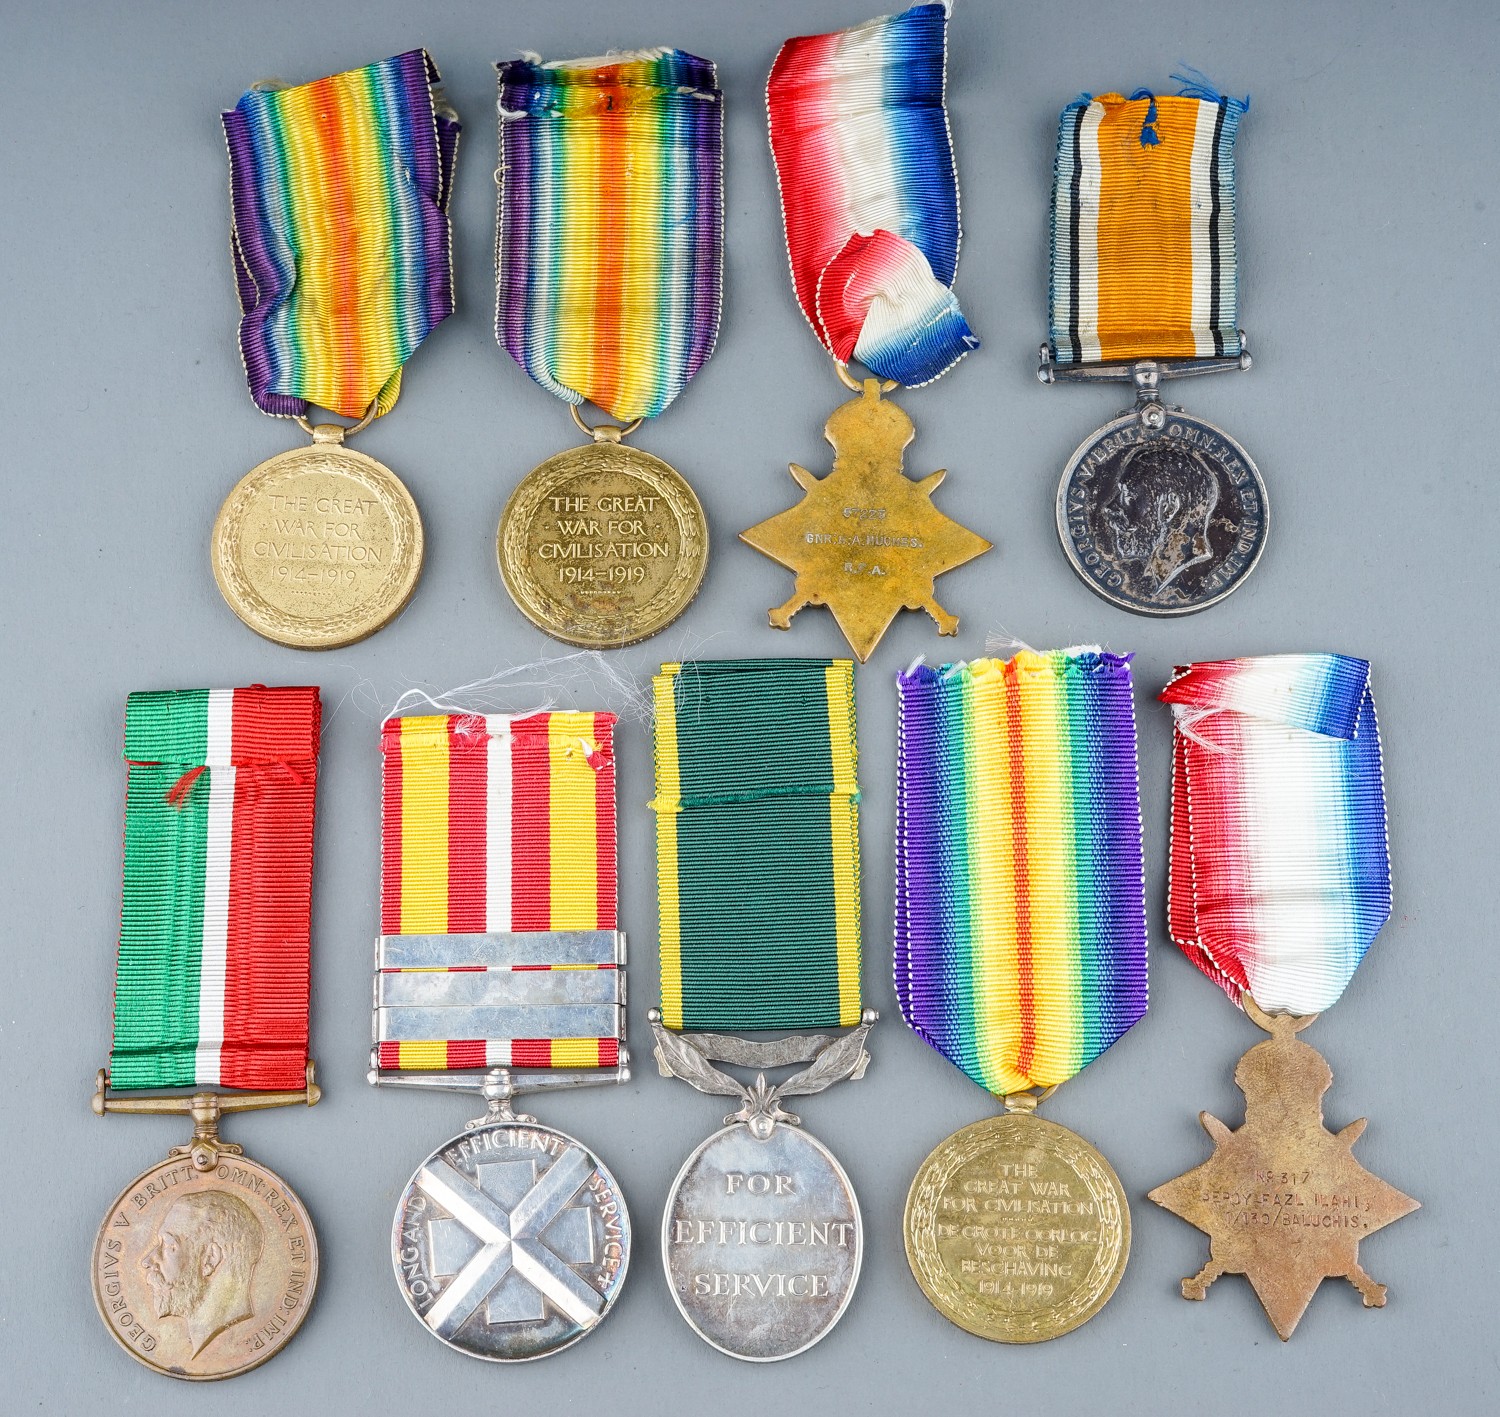 A collection of British Medals. Great War Pair - R-29124 A Cpl H H Simpkins K R Rif C. Condition - Image 2 of 12